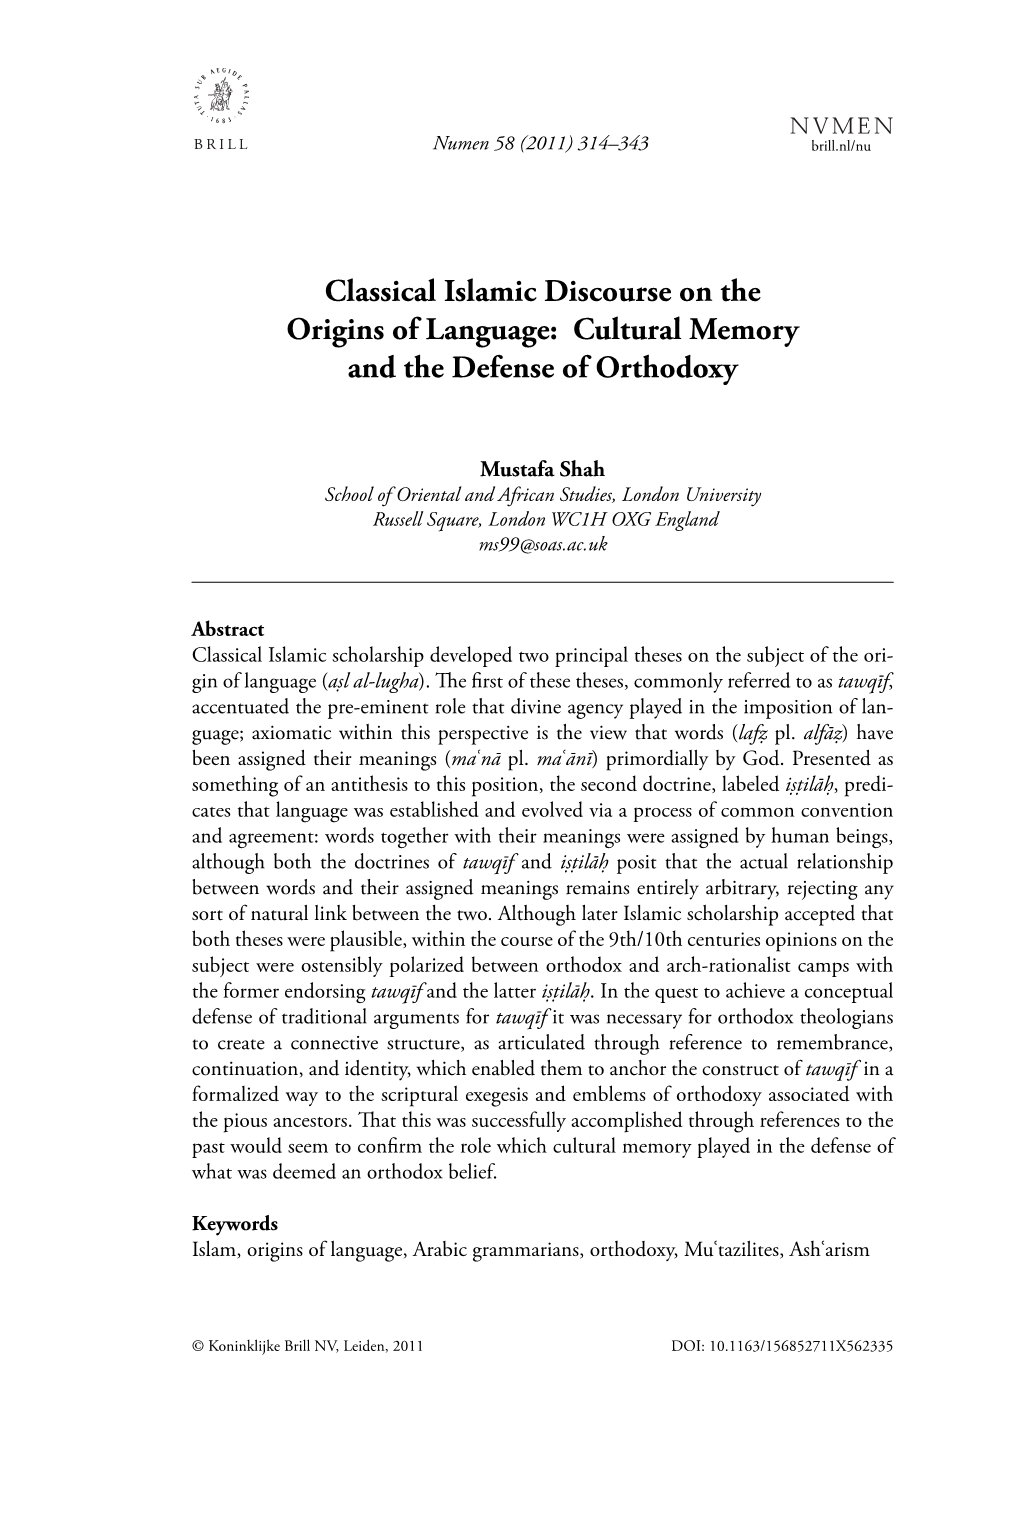 Classical Islamic Discourse on the Origins of Language: Cultural Memory and the Defense of Orthodoxy